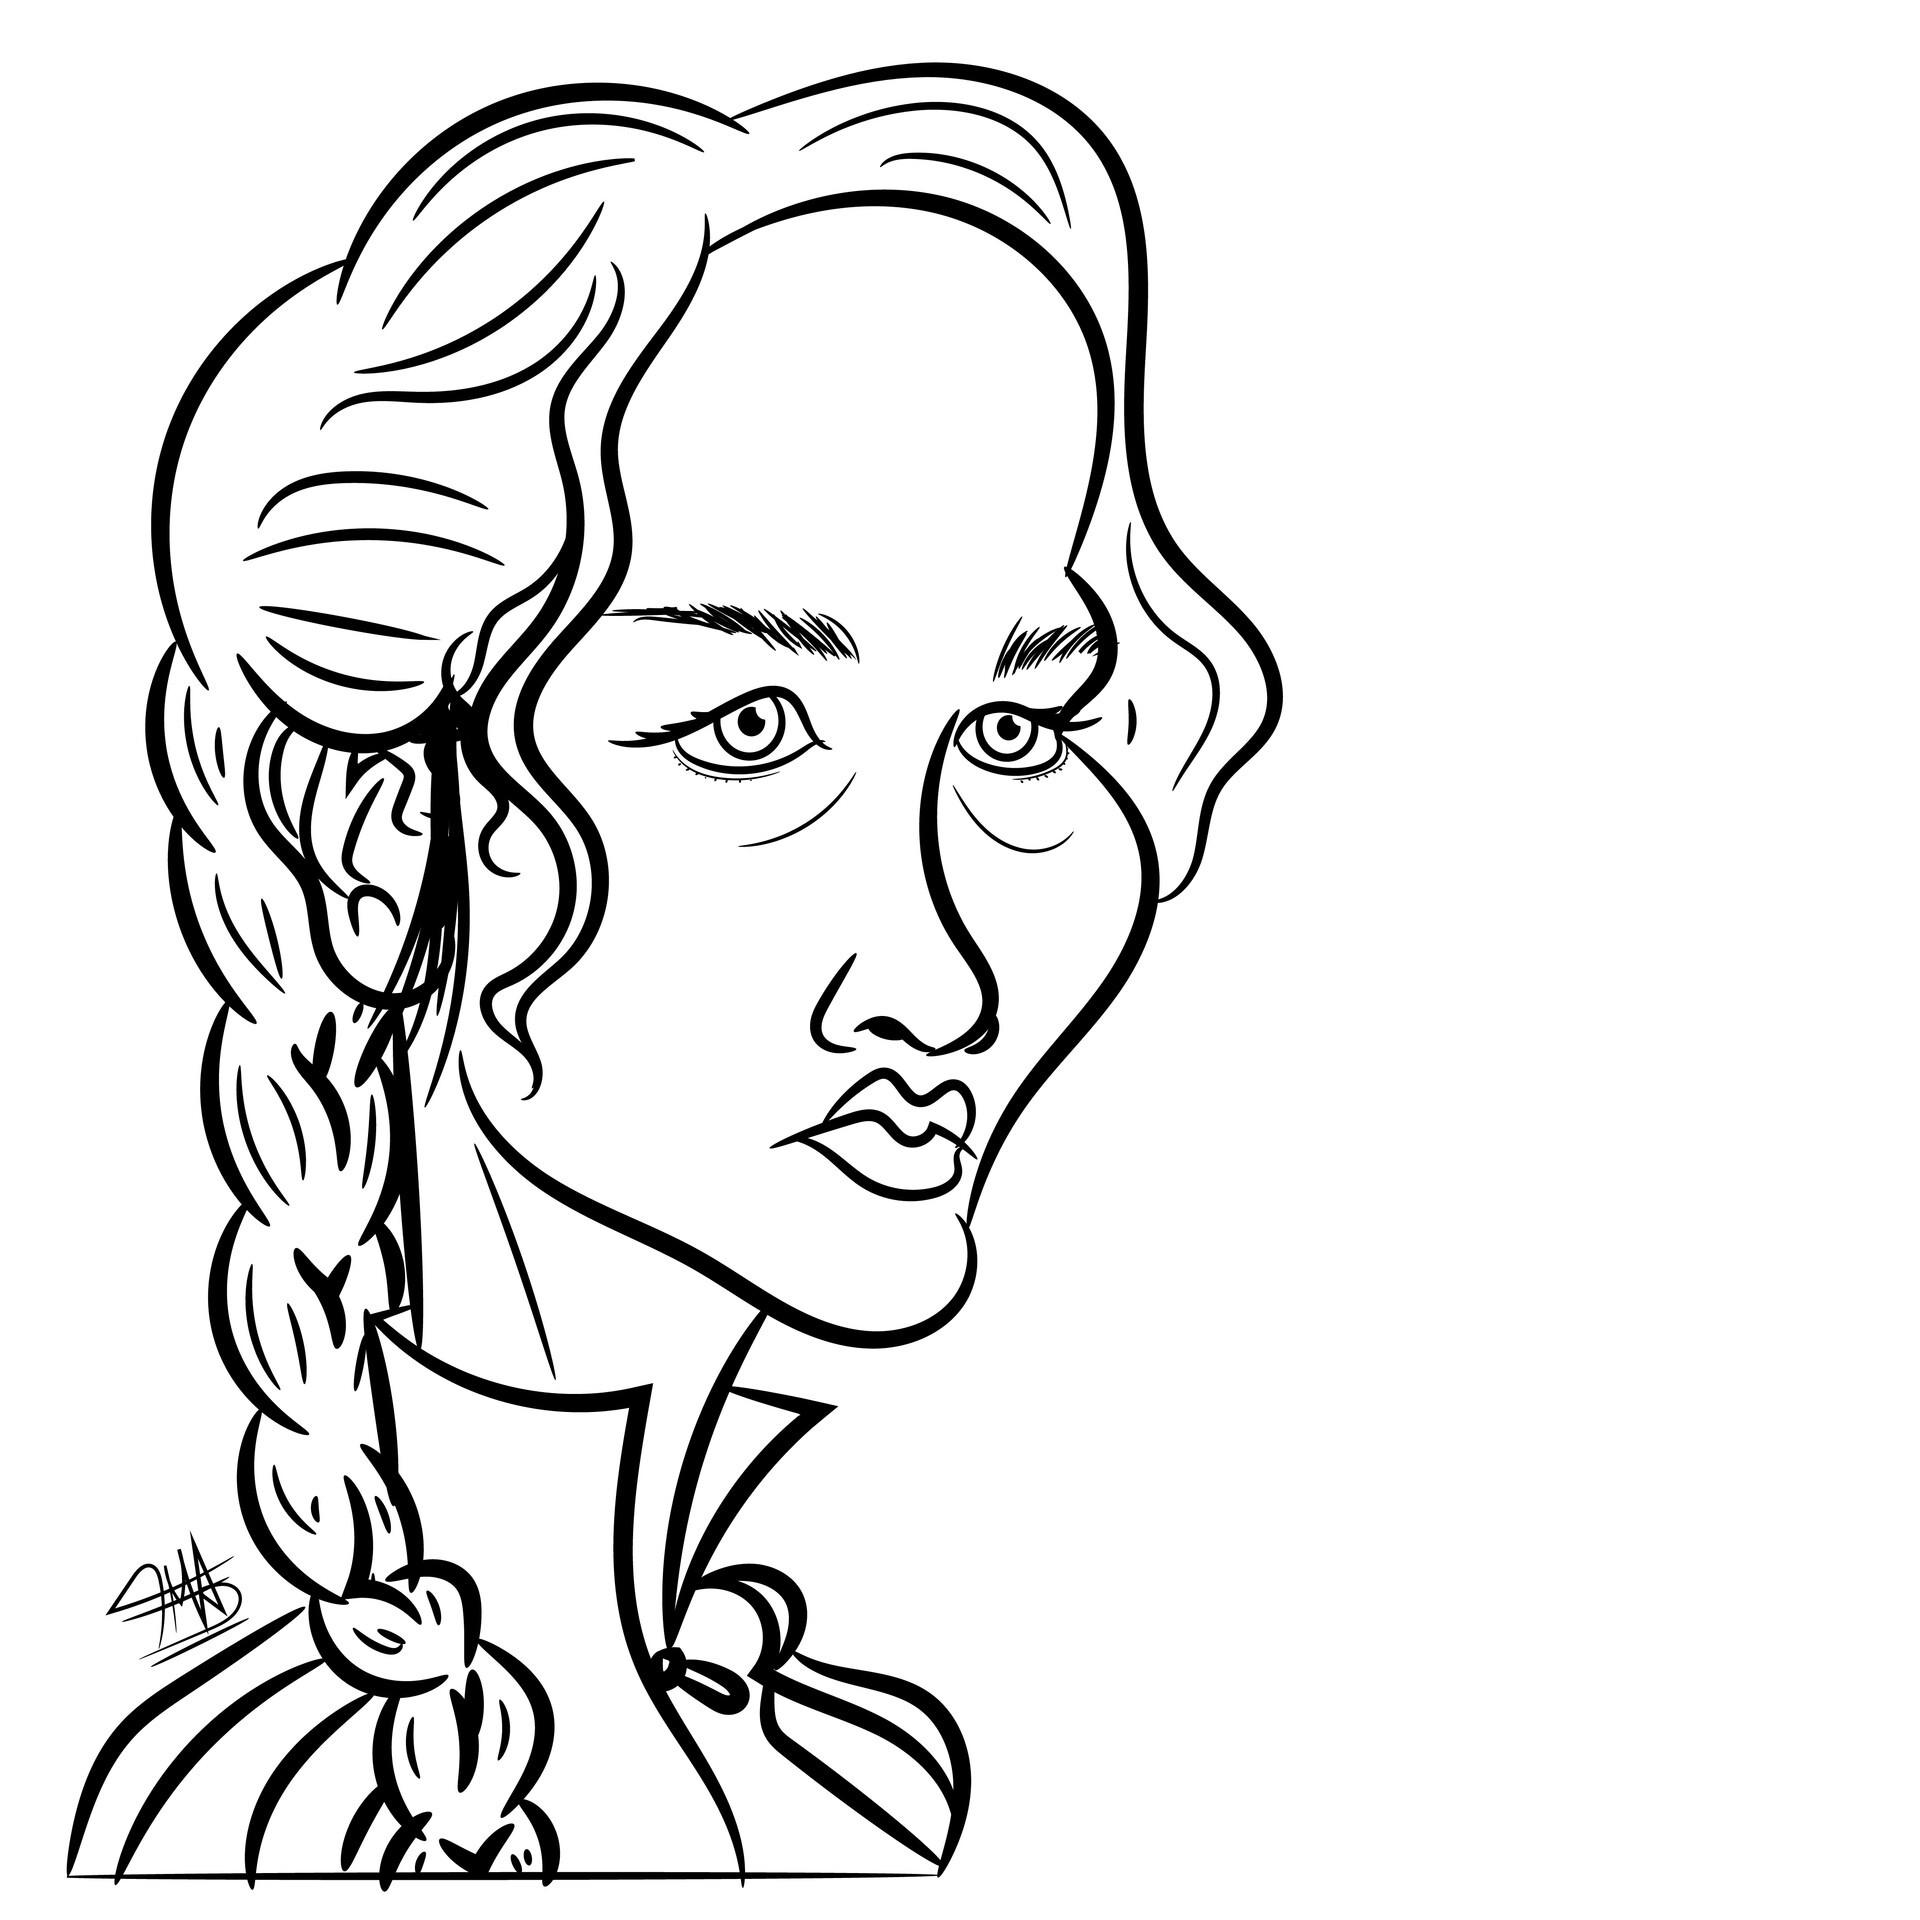 coloring pages of the hunger games